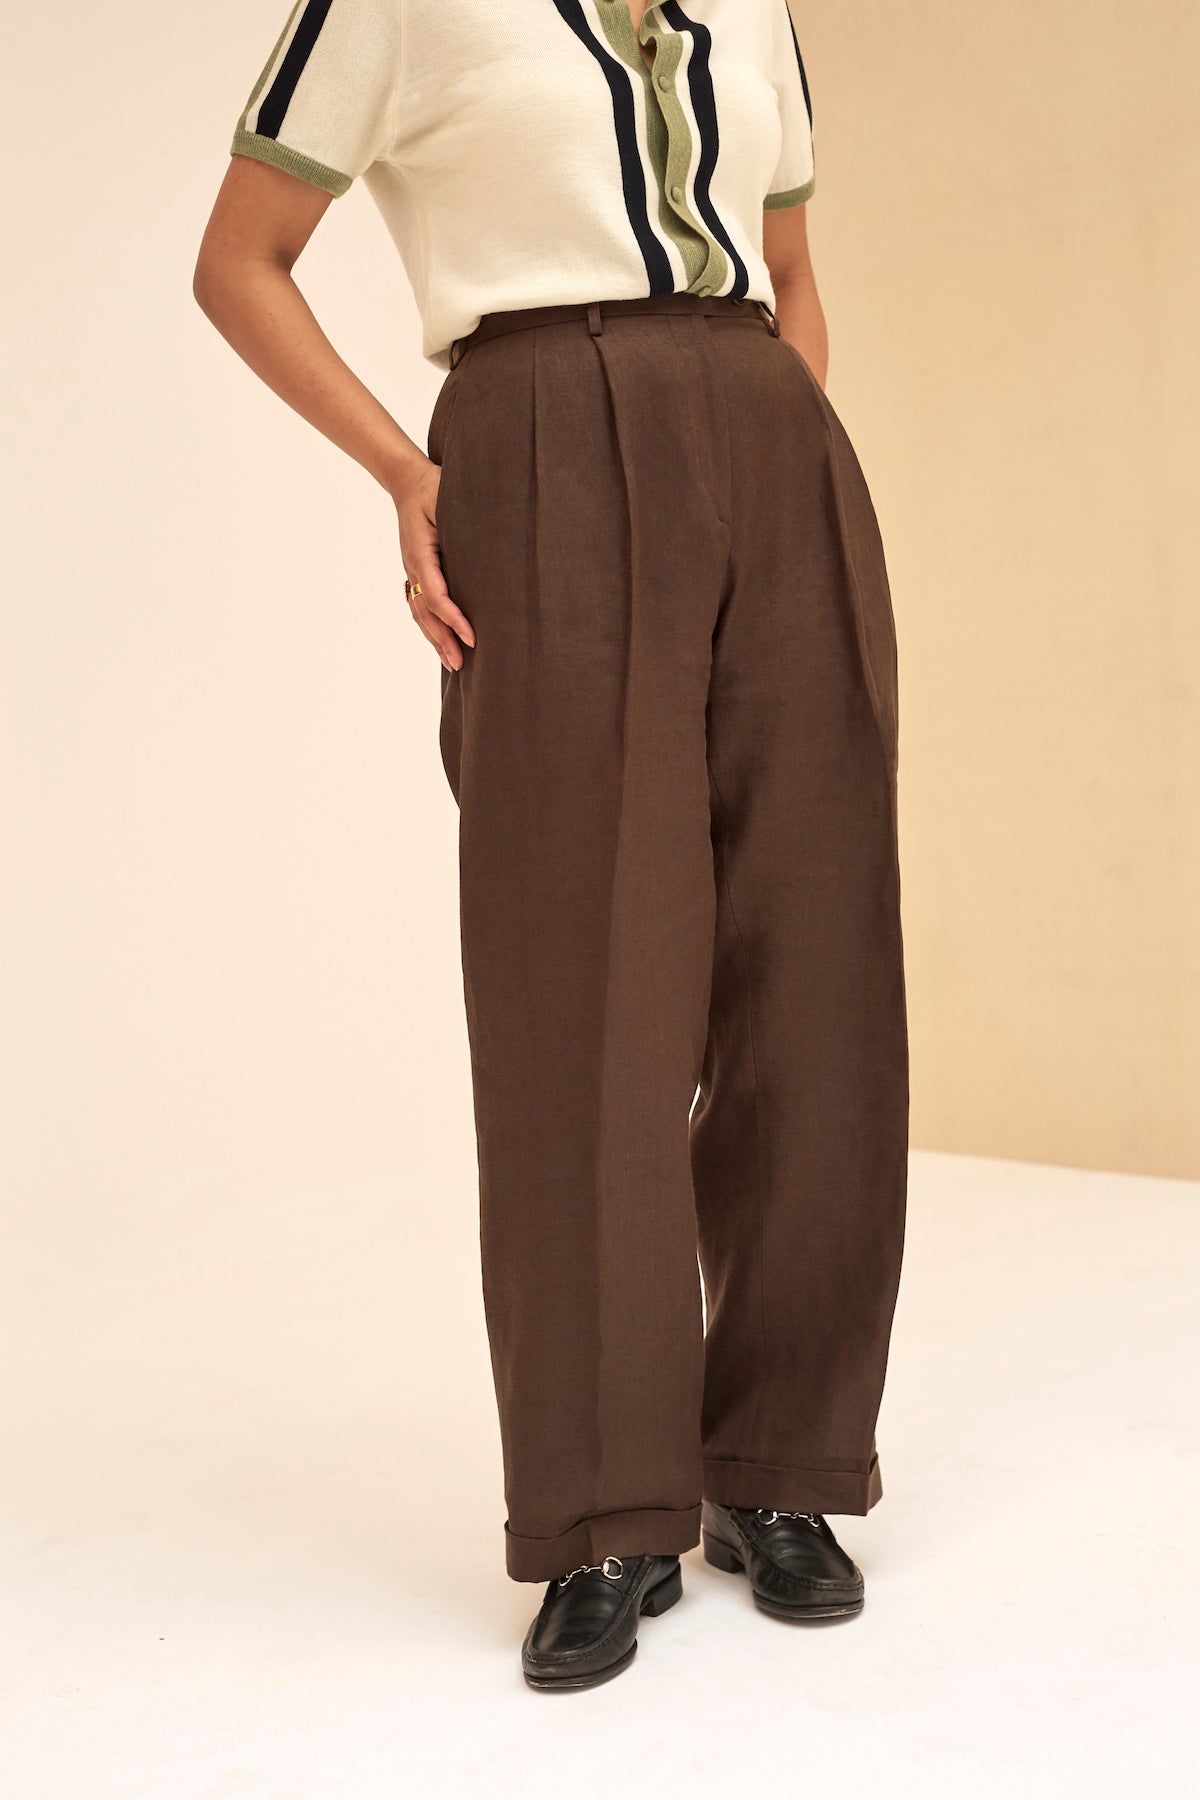 Top Down Center Out with the Eve Trousers – The Crooked Hem